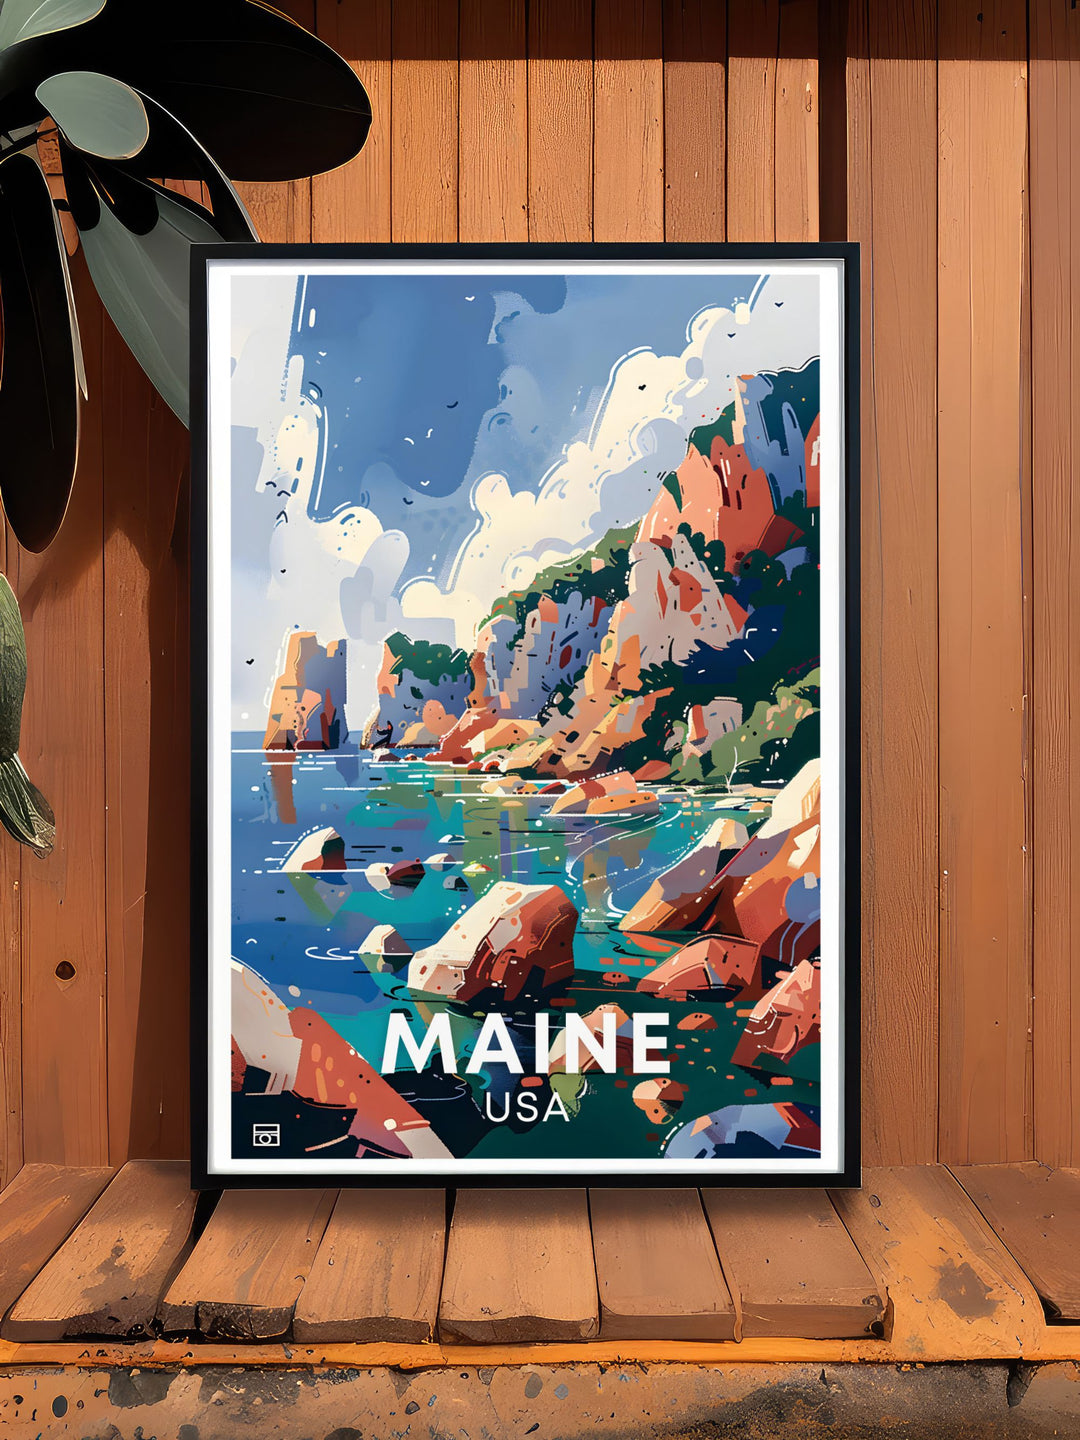 The dynamic energy of Acadia National Park, known for its stunning views and rich biodiversity, is highlighted in this travel poster. Ideal for nature lovers and outdoor adventurers, this artwork captures the parks vibrant natural beauty.